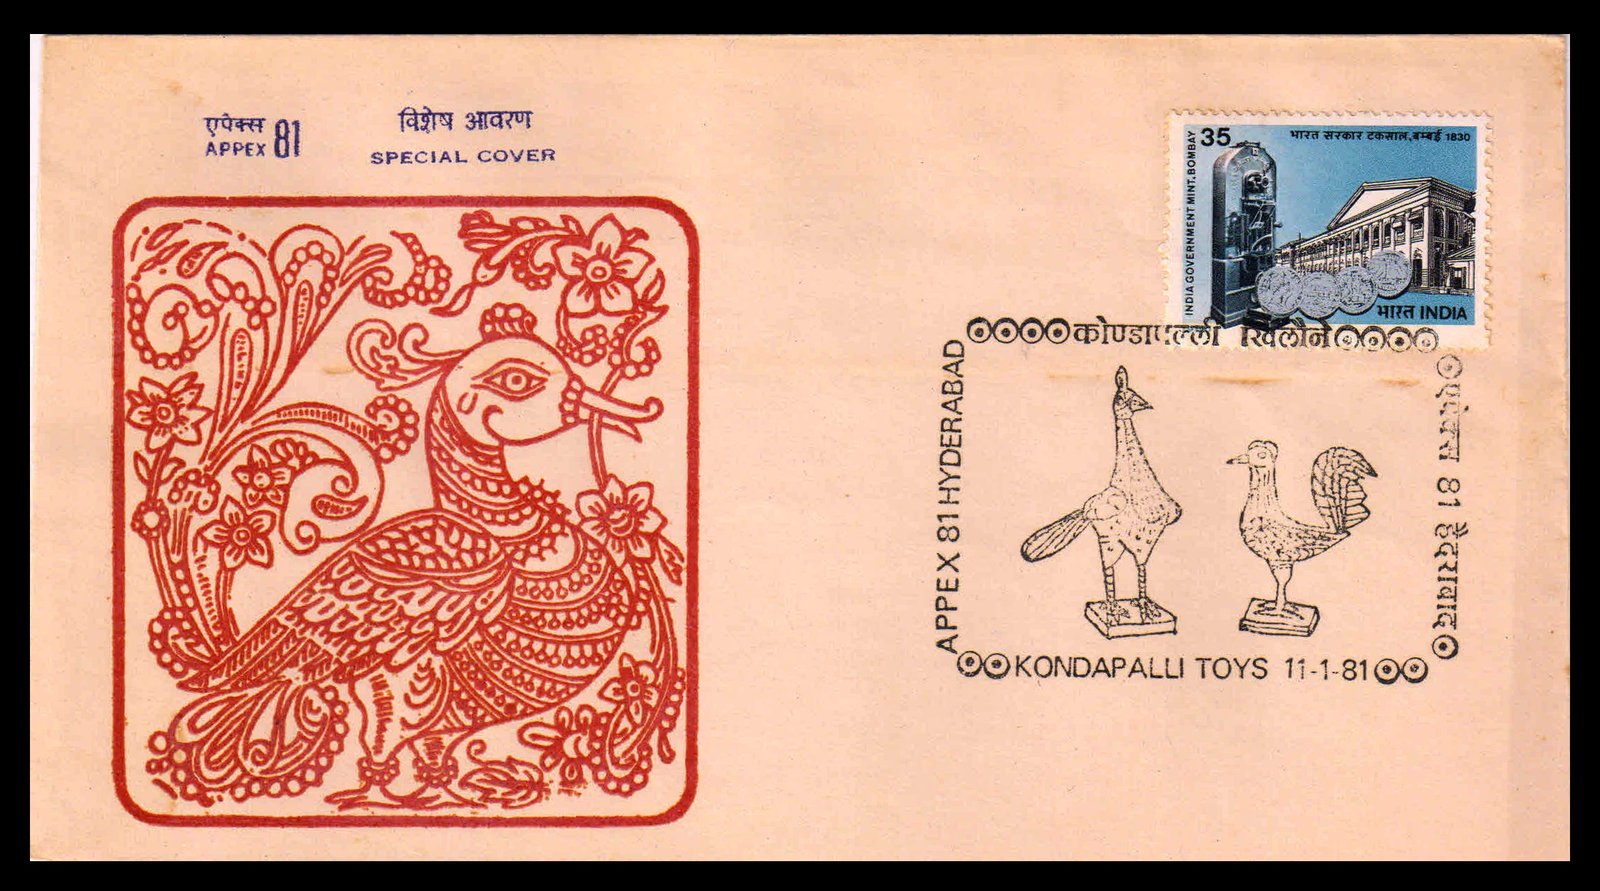 INDIA STAMP Exhibition Special Cover. APPEX 81. Kondapalli Toys. as per scan